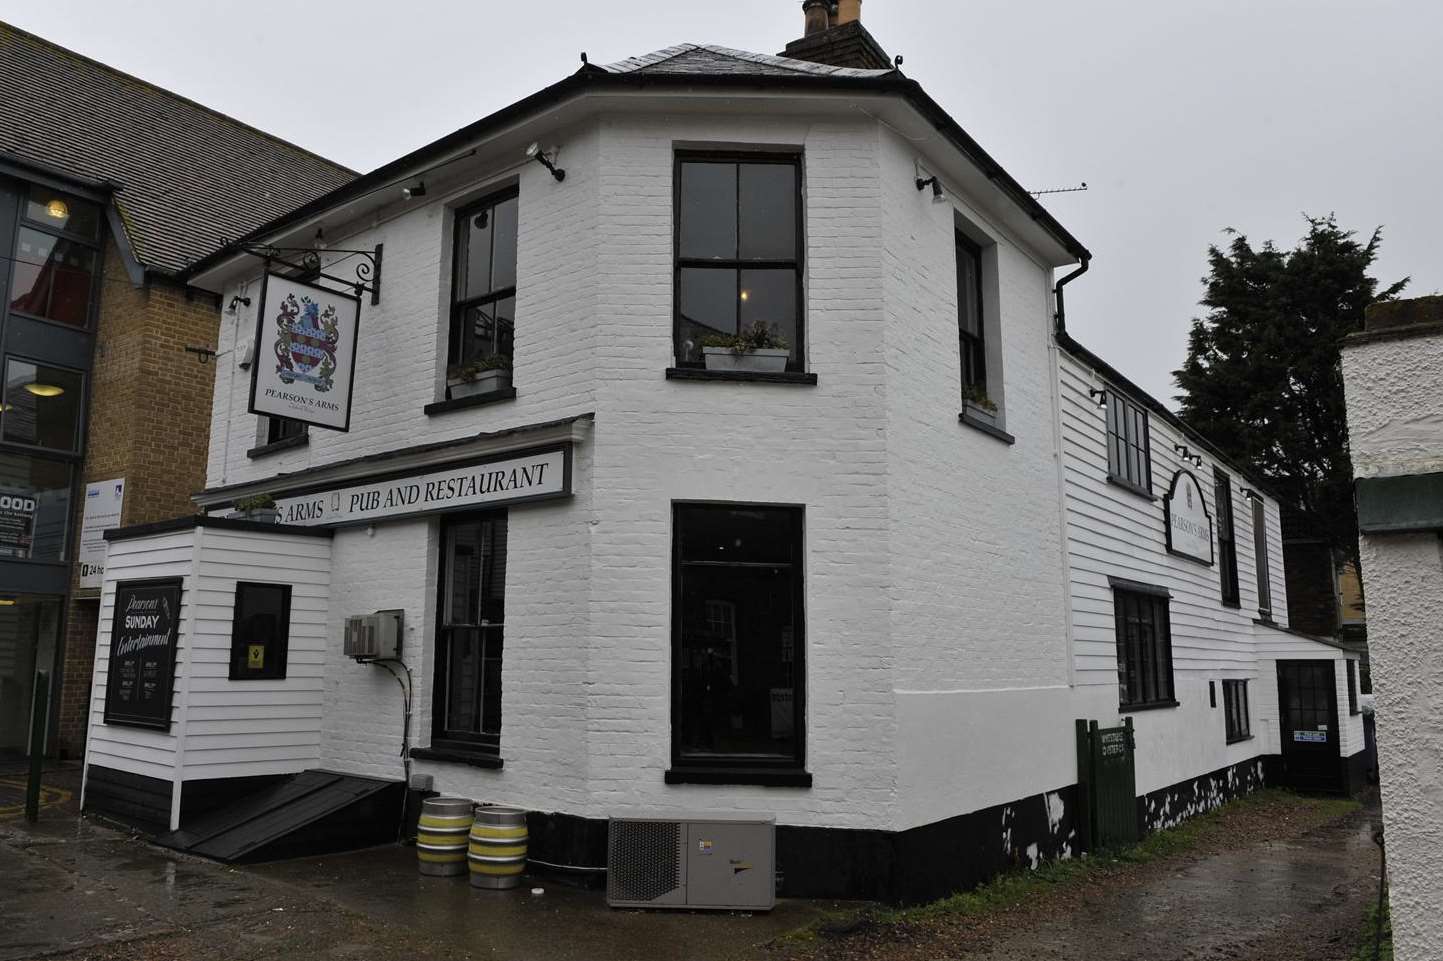 The Pearson's Arms in Whitstable has made the Michelin Eating Out in Pubs guide again